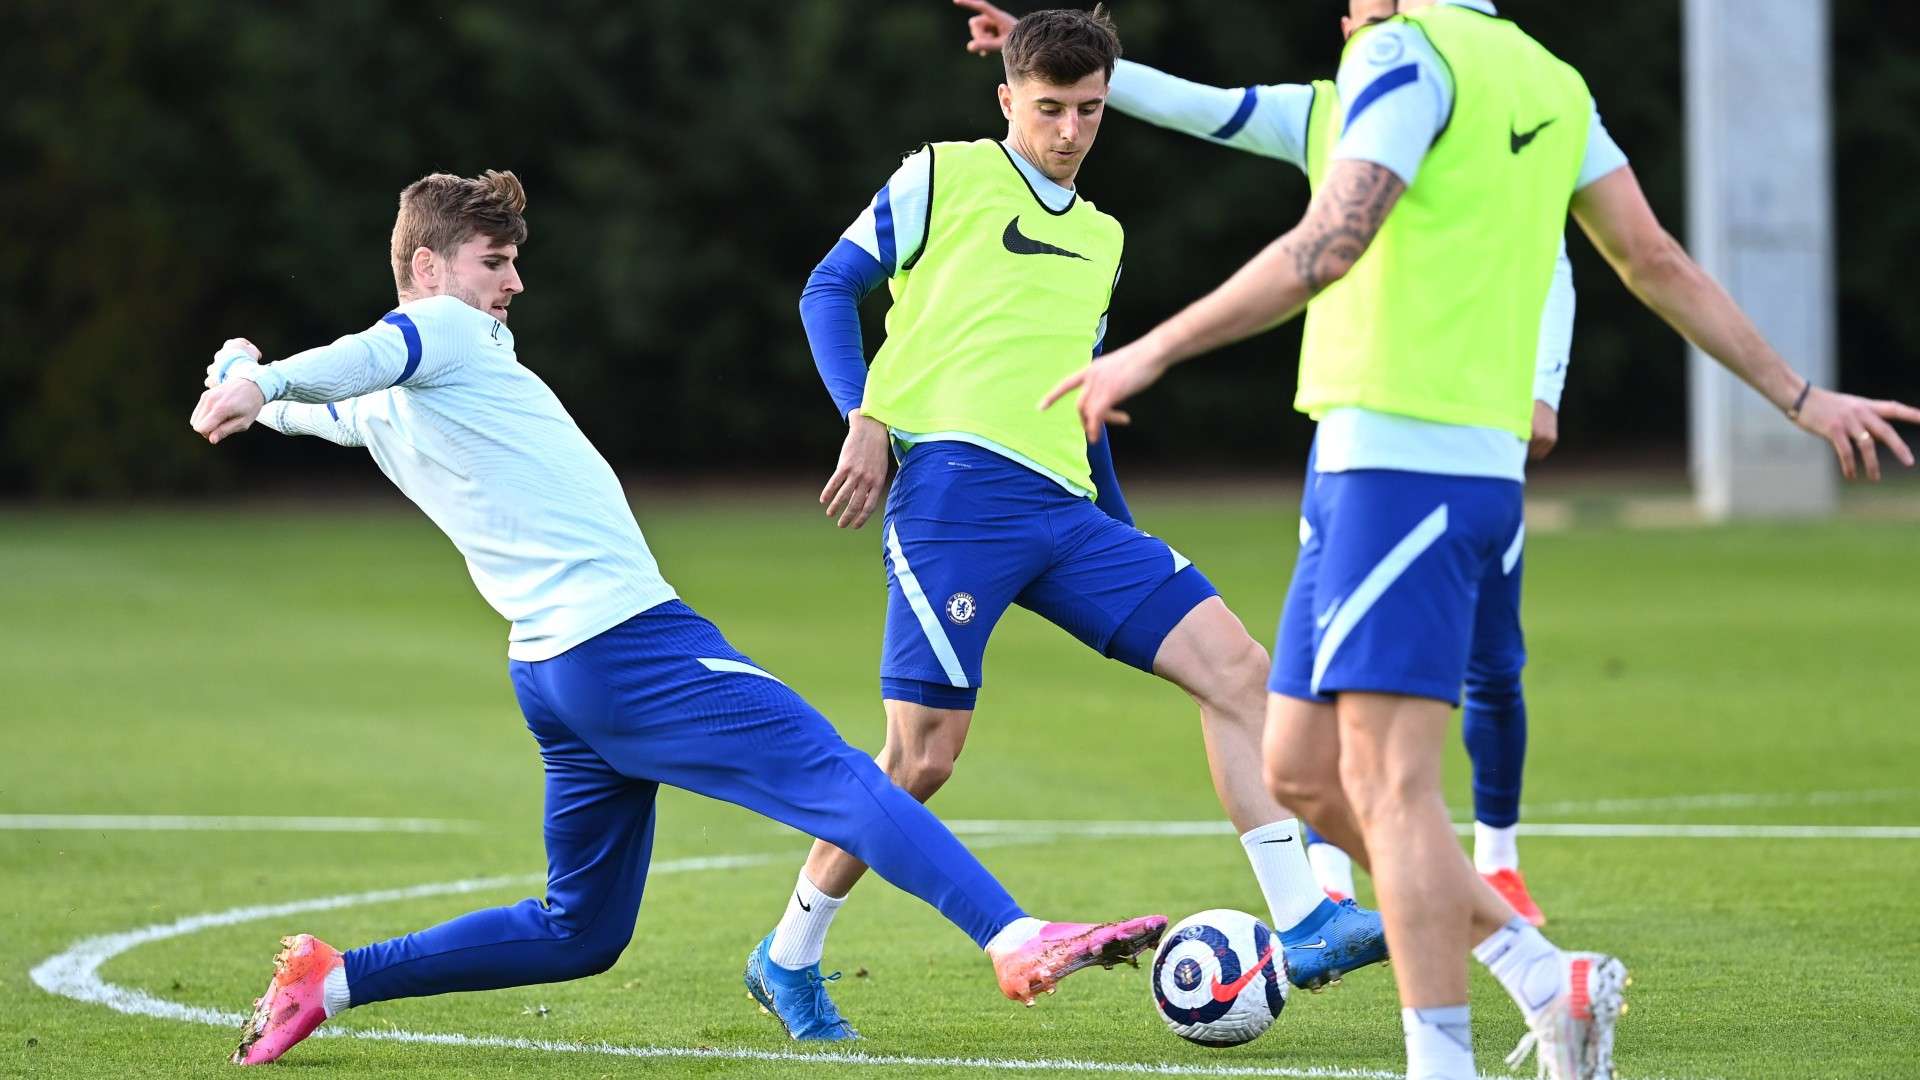 Chelsea players training in a file photo; Credit: Chelsea FC Twitter page